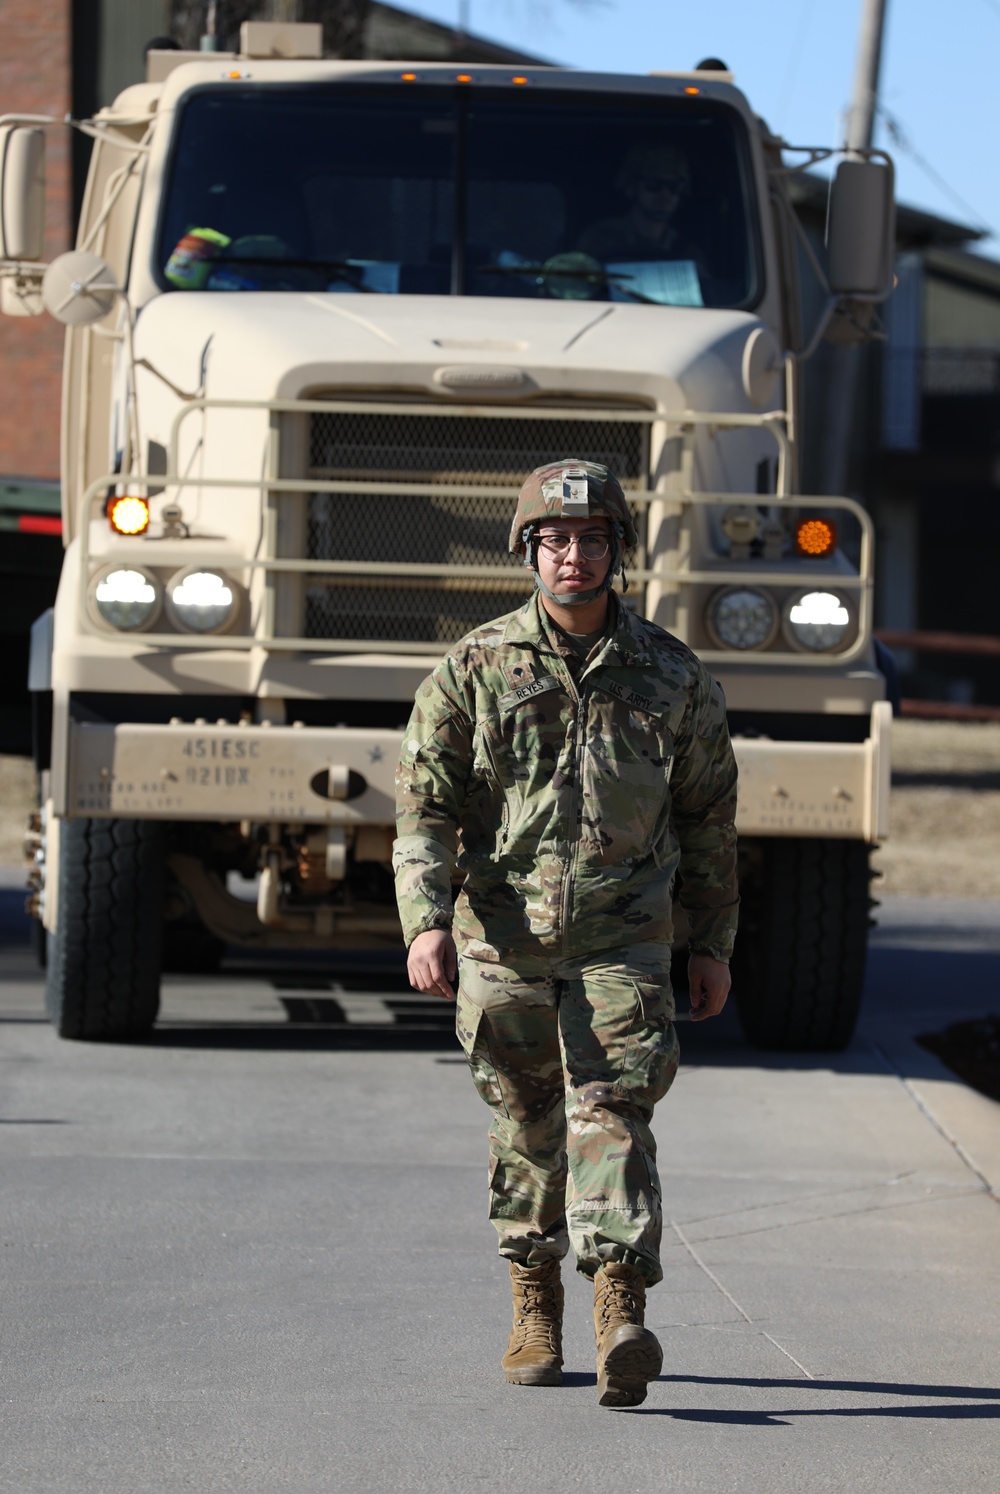 425th Transportation Company Loads up Vehicles for Transport